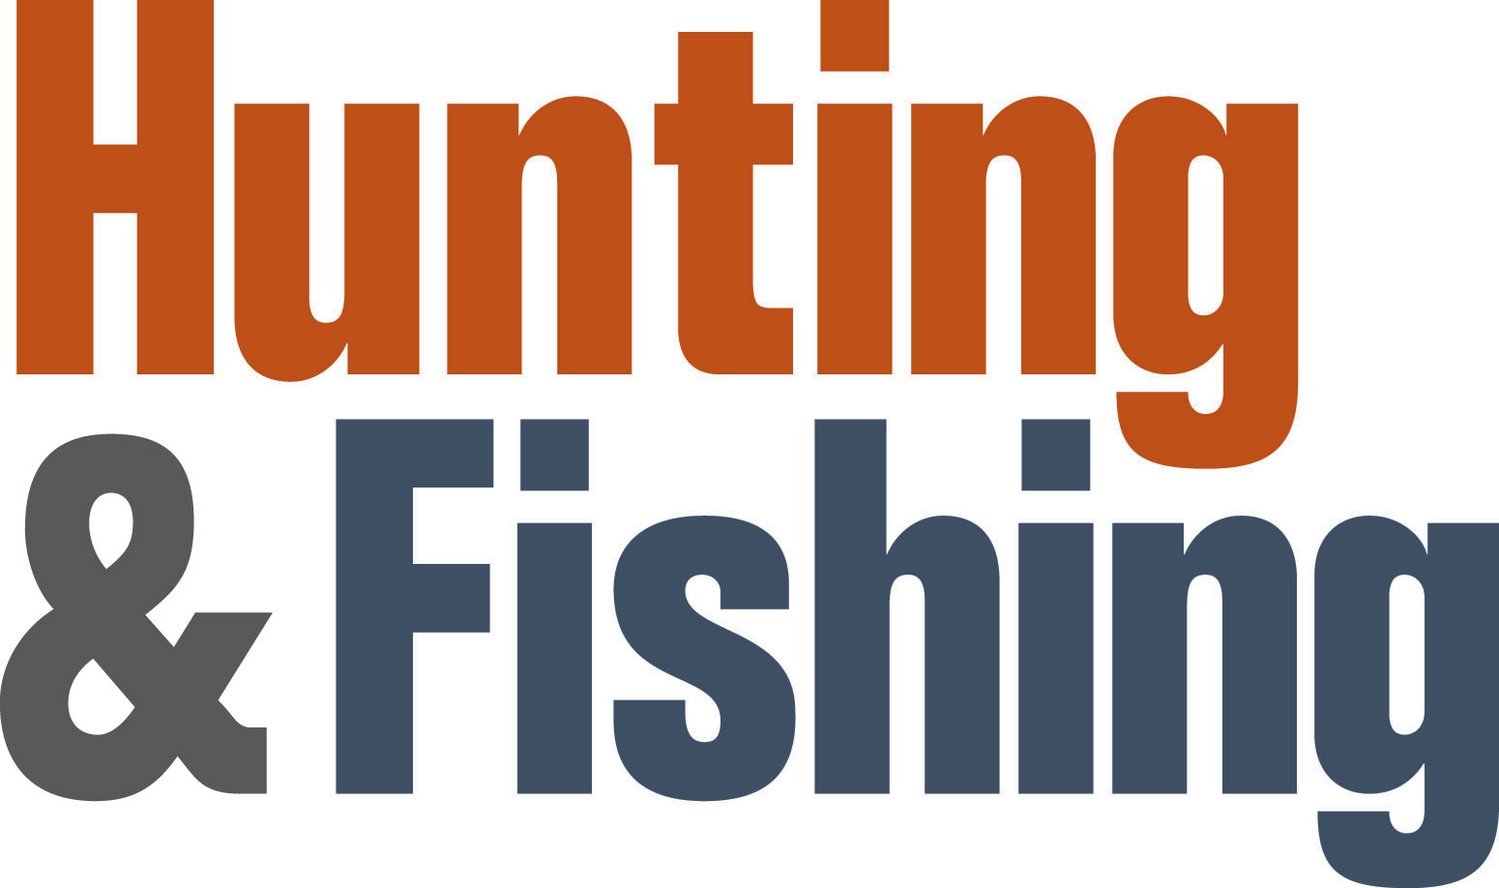 National Hunting and Fishing day is Sept. 25